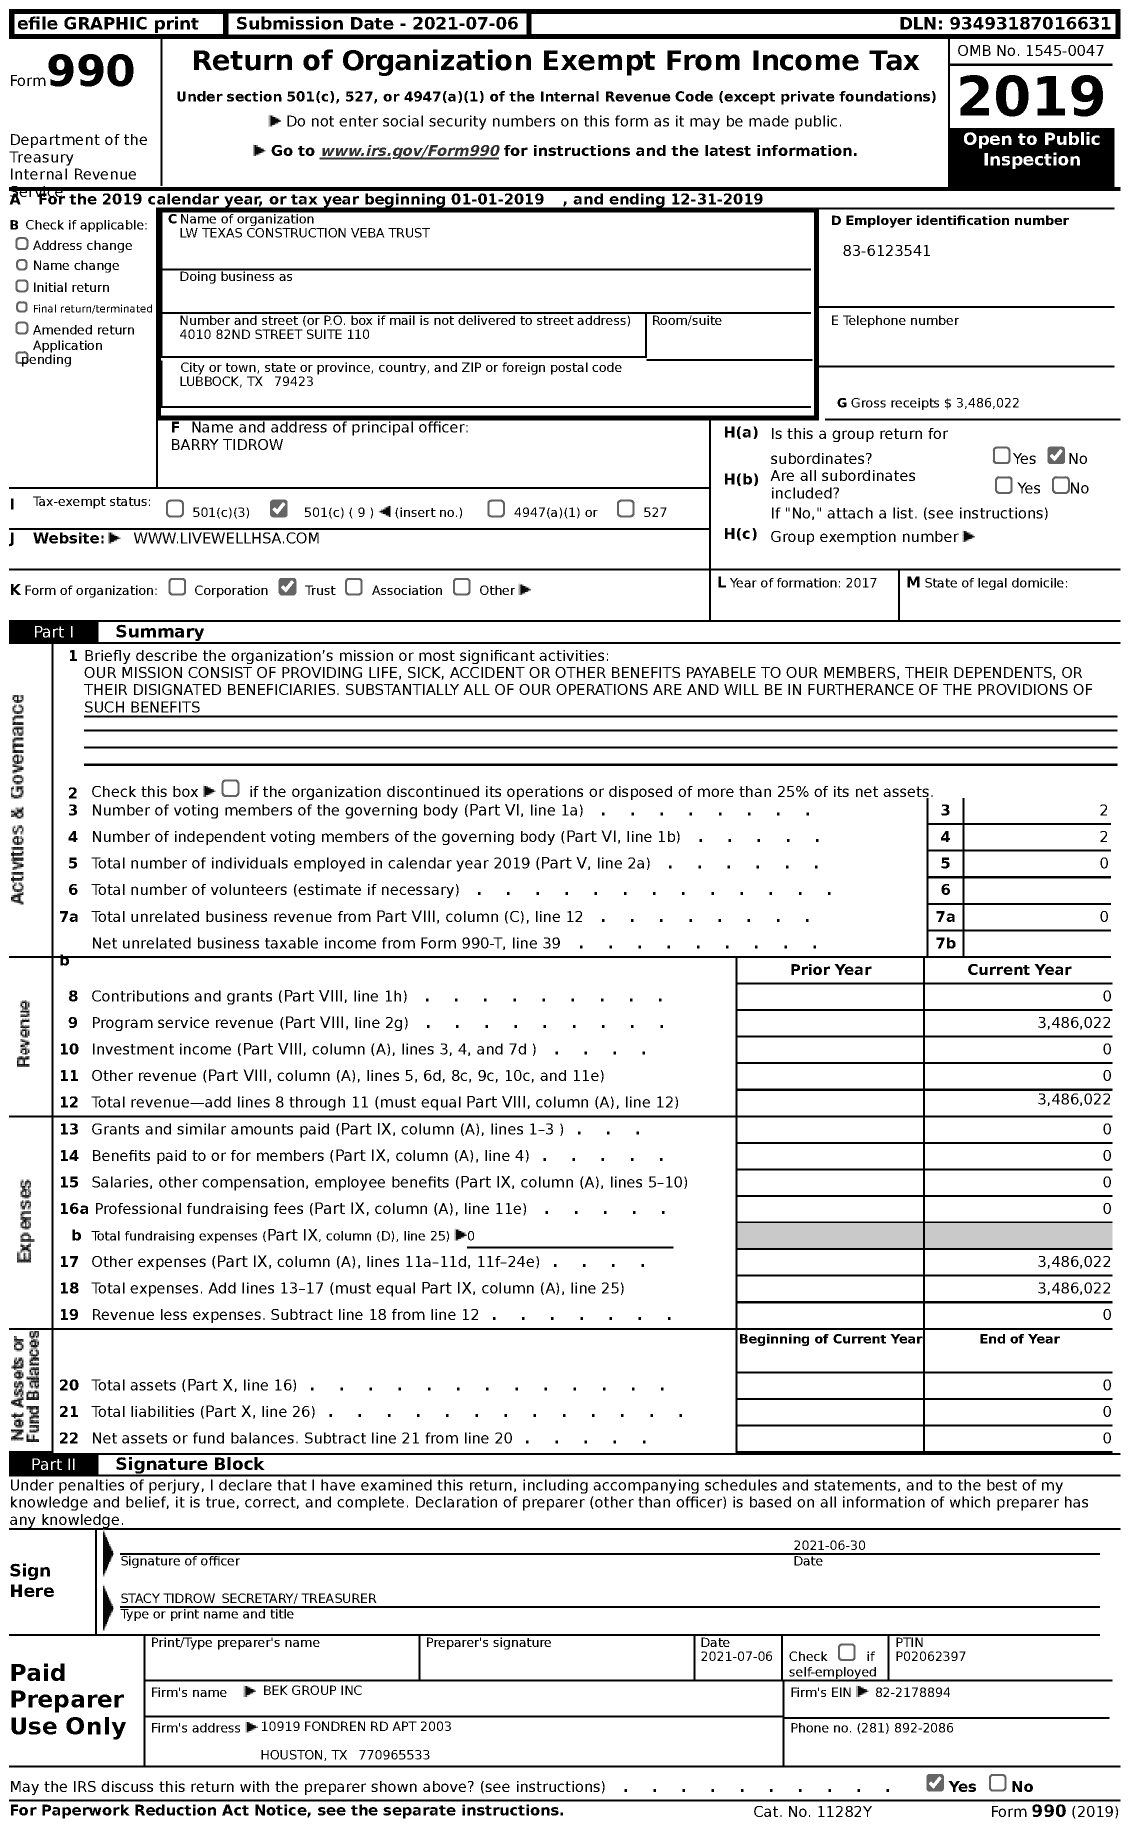 Image of first page of 2019 Form 990 for LW Texas Construction Veba Trust